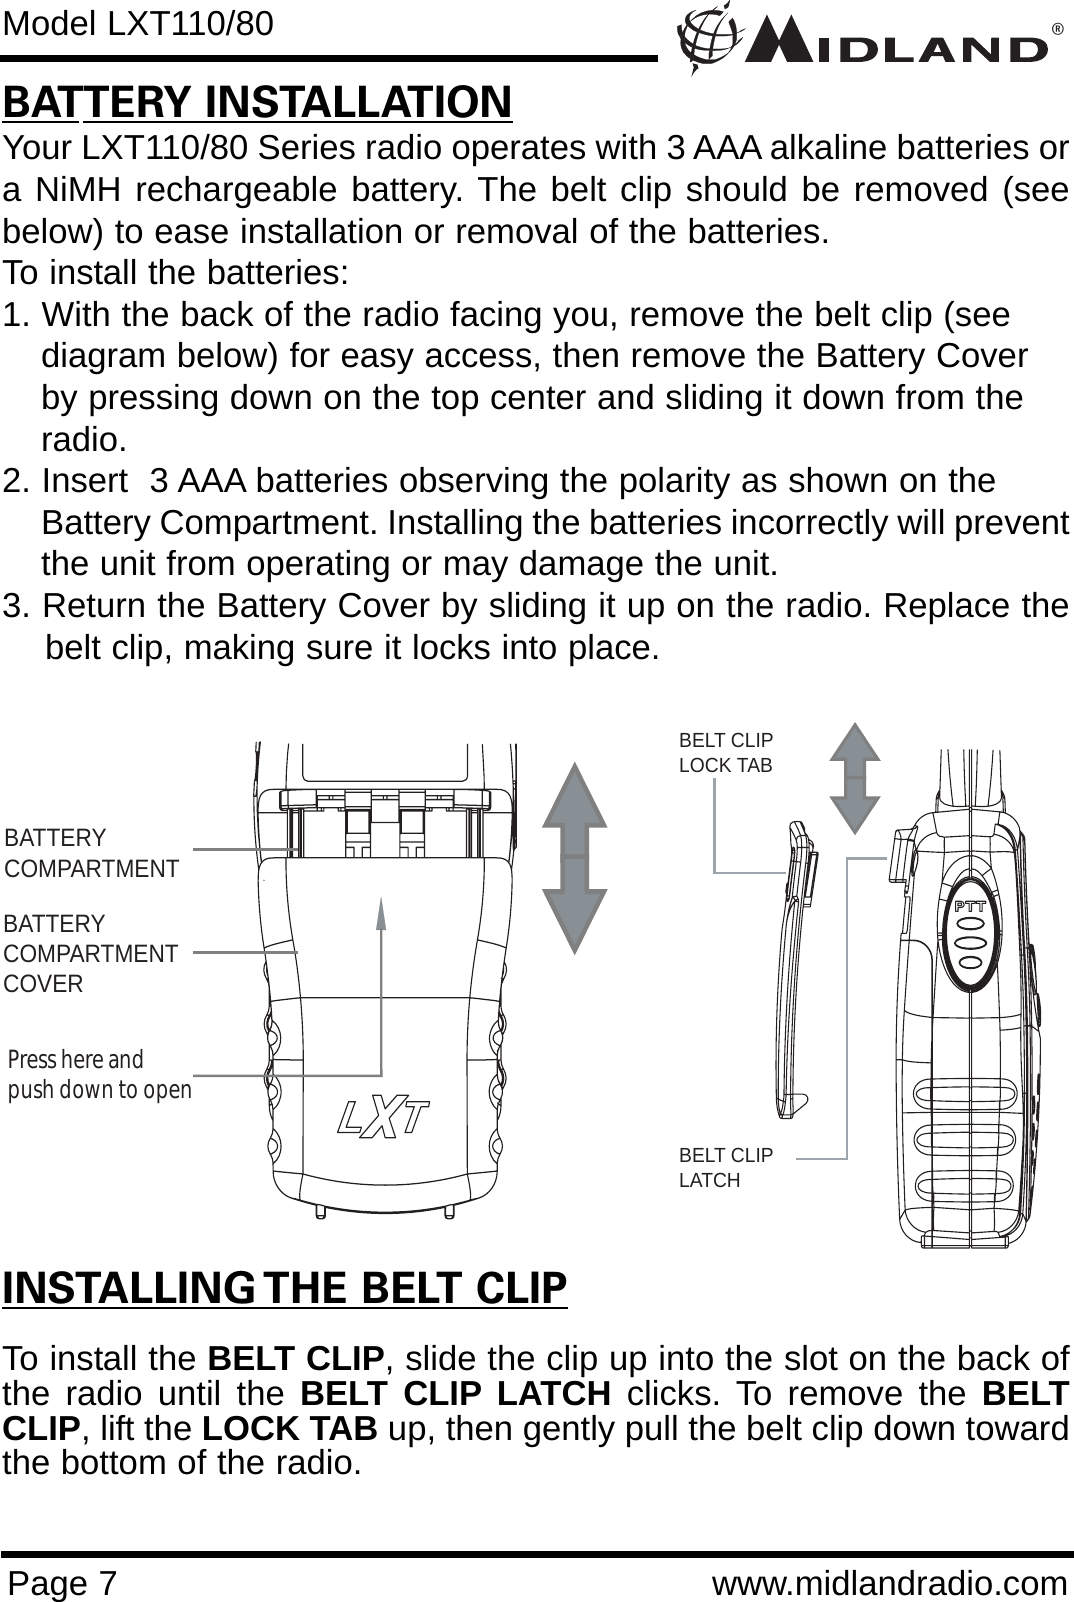 ®Page 7 www.midlandradio.comBATTERY INSTALLATIONYour LXT110/80 Series radio operates with 3 AAA alkaline batteries ora NiMH rechargeable battery. The belt clip should be removed (seebelow) to ease installation or removal of the batteries. To install the batteries:1. With the back of the radio facing you, remove the belt clip (see diagram below) for easy access, then remove the Battery Cover by pressing down on the top center and sliding it down from the radio.2. Insert  3 AAA batteries observing the polarity as shown on the Battery Compartment. Installing the batteries incorrectly will preventthe unit from operating or may damage the unit.3. Return the Battery Cover by sliding it up on the radio. Replace thebelt clip, making sure it locks into place.BATTERYCOMPARTMENTBATTERYCOMPARTMENTCOVERPress here and push down to openModel LXT110/80INSTALLING THE BELT CLIPTo install the BELT CLIP, slide the clip up into the slot on the back ofthe radio until the BELT CLIP LATCH clicks. To remove the BELTCLIP, lift the LOCK TAB up, then gently pull the belt clip down towardthe bottom of the radio.BELT CLIPLOCK TABBELT CLIP LATCH